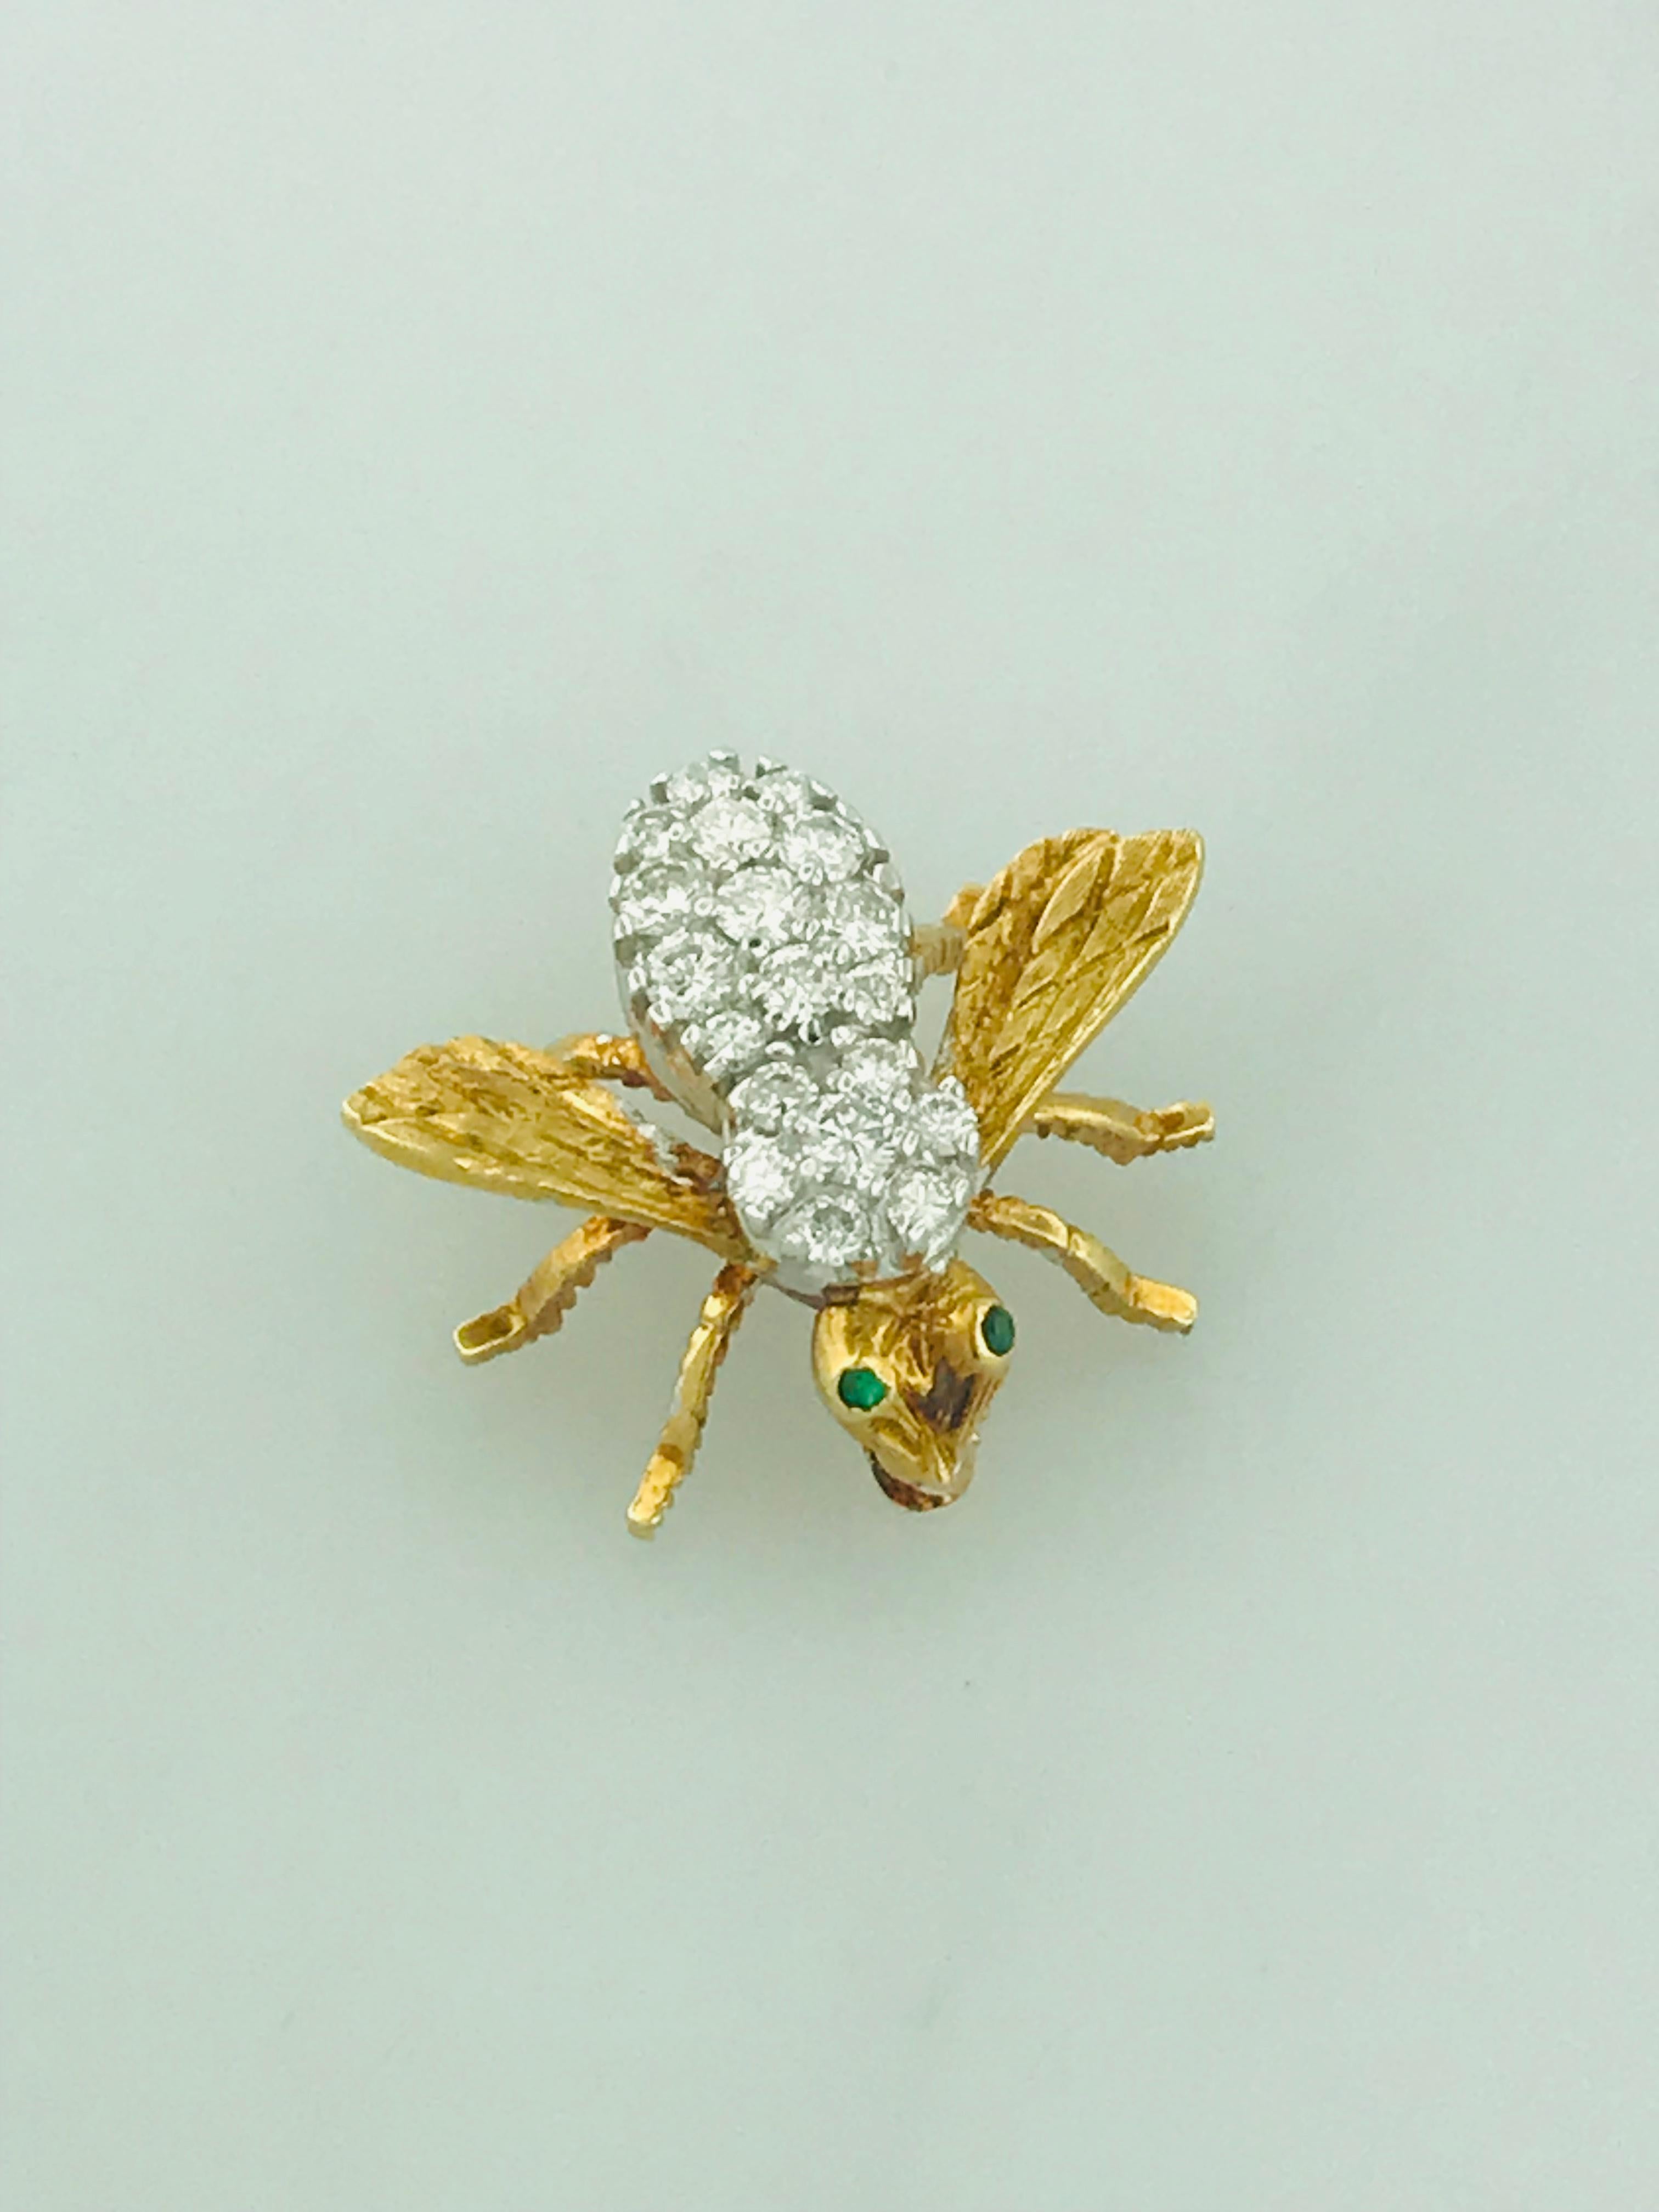 This adorable honey bee pin is paved in genuine natural round brilliant diamonds. There is a total of .65 carats total diamond weight. The diamonds are top quality, VS clarity and E-F Color! The eyes of the bee are made out of genuine emerald